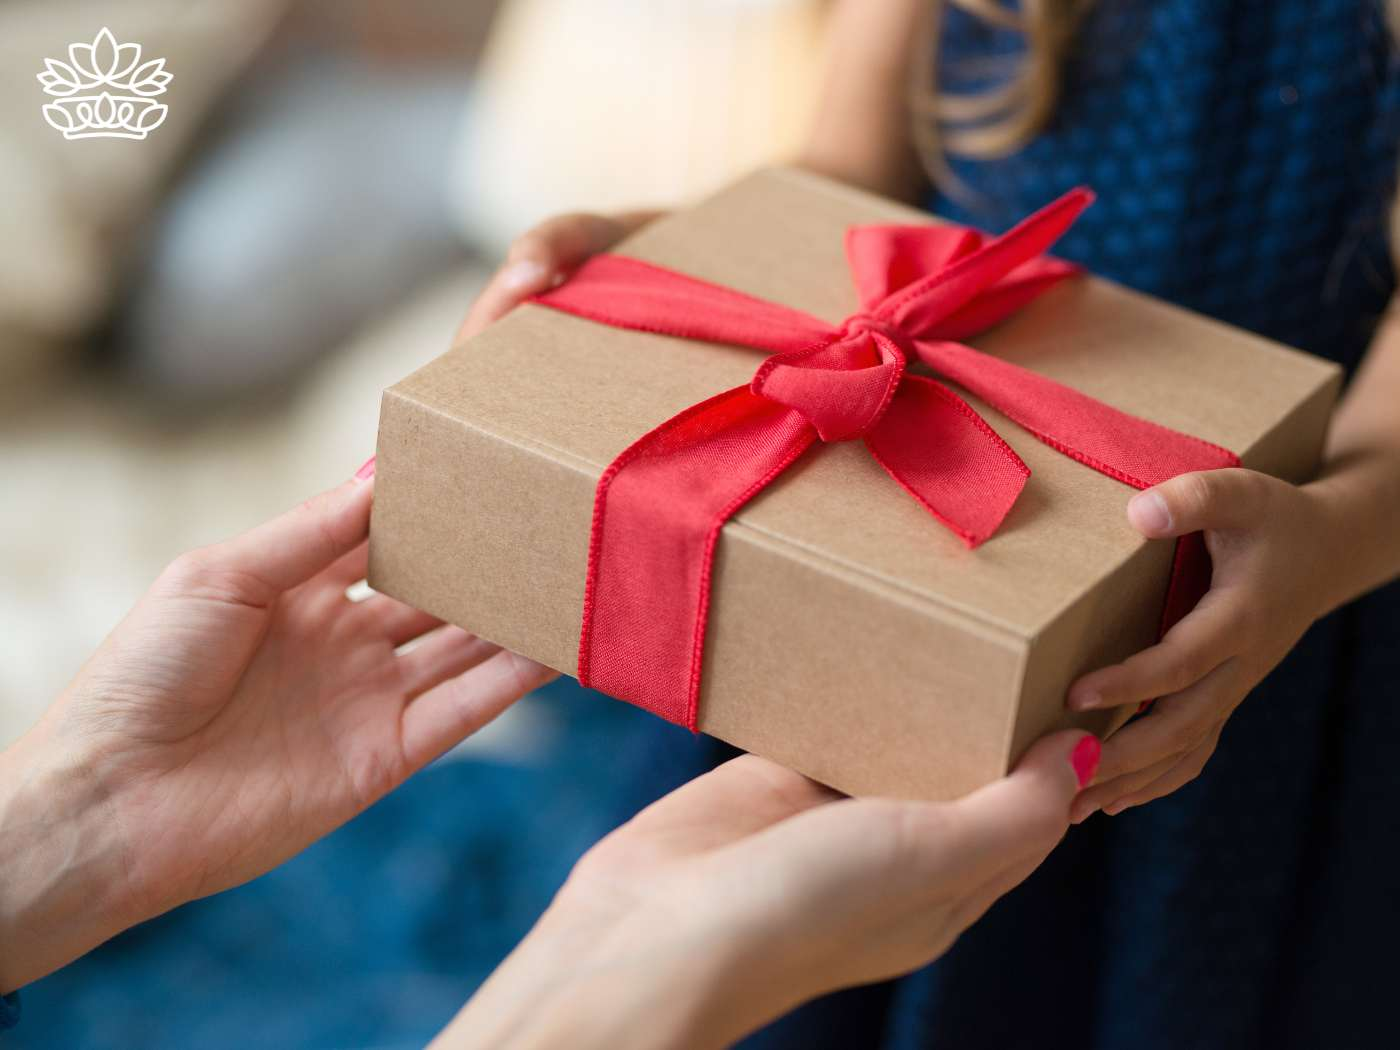 Close-up of a person's hands exchanging a beautifully wrapped gift box, embodying the art of giving within a budget, and adding a touch of magic to the moment. Part of the Gift Boxes Collection from Fabulous Flowers and Gifts.